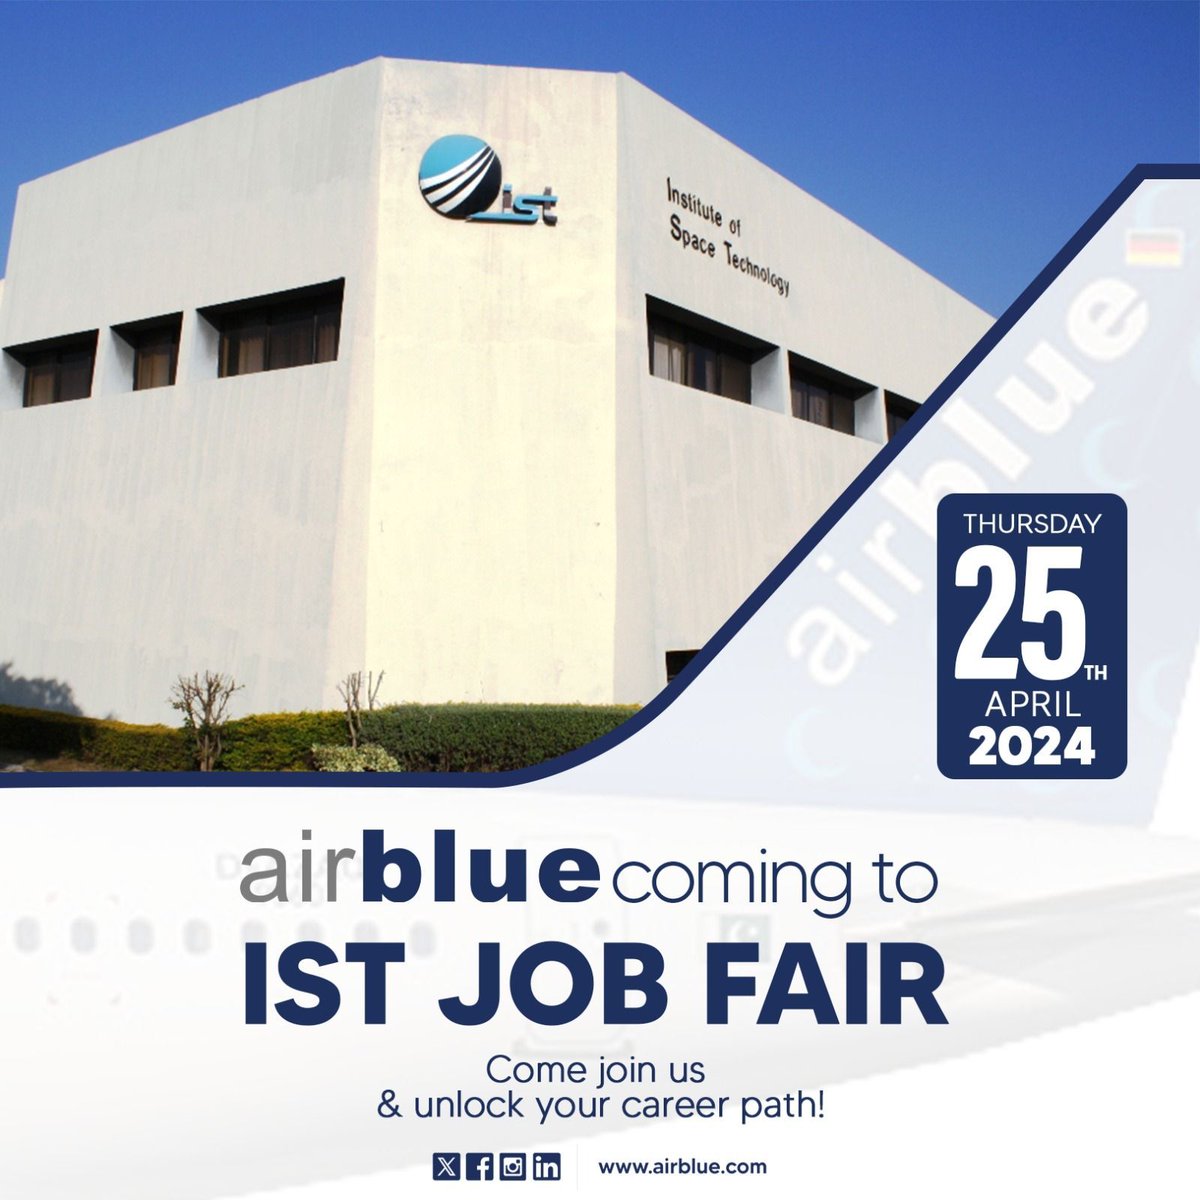 Explore potential career paths and seize the opportunity to shine at the job fair held at IST on April 25th. #Airblue #Jobfair #Careerfair #IST #hiringatairblue #JobFair #Skills #Workplace